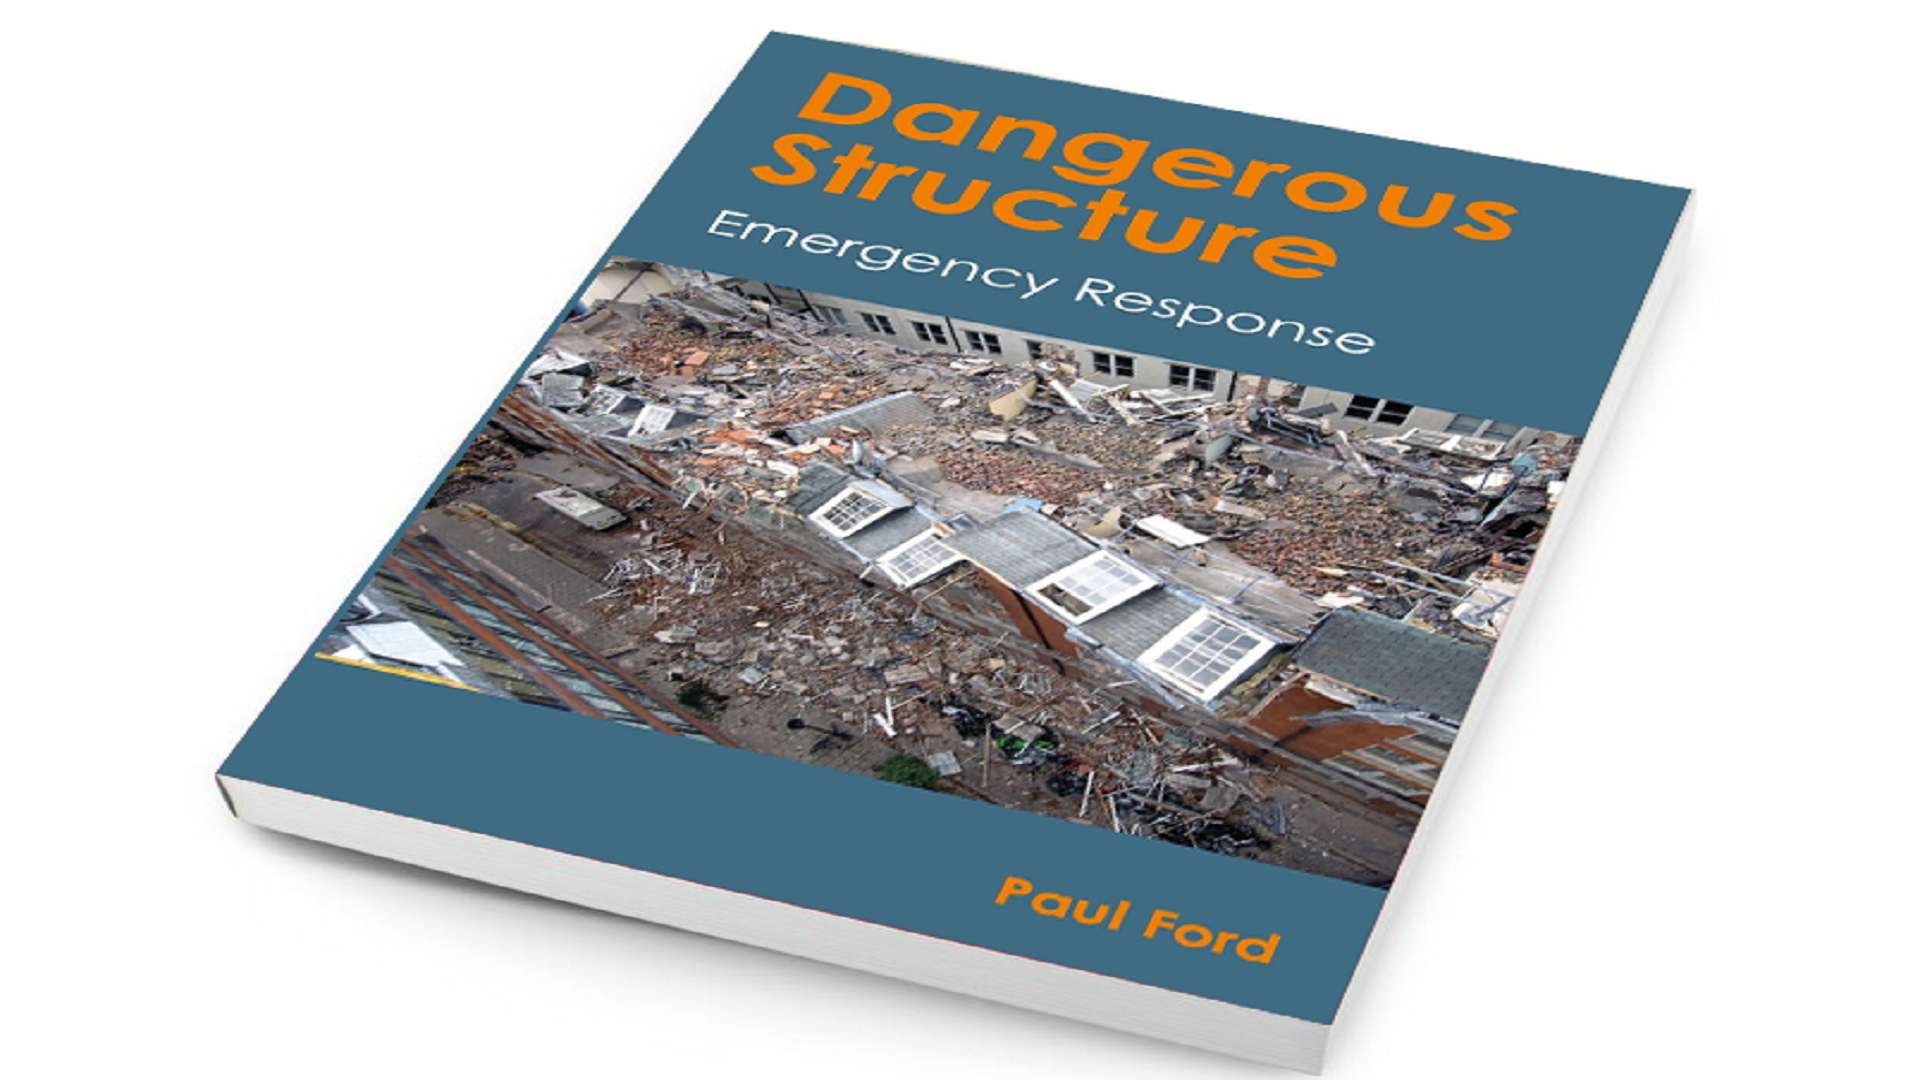 https://www.deconstructuk.com/wp-content/uploads/2023/05/Dangerous-Structures-the-book_sticky.png